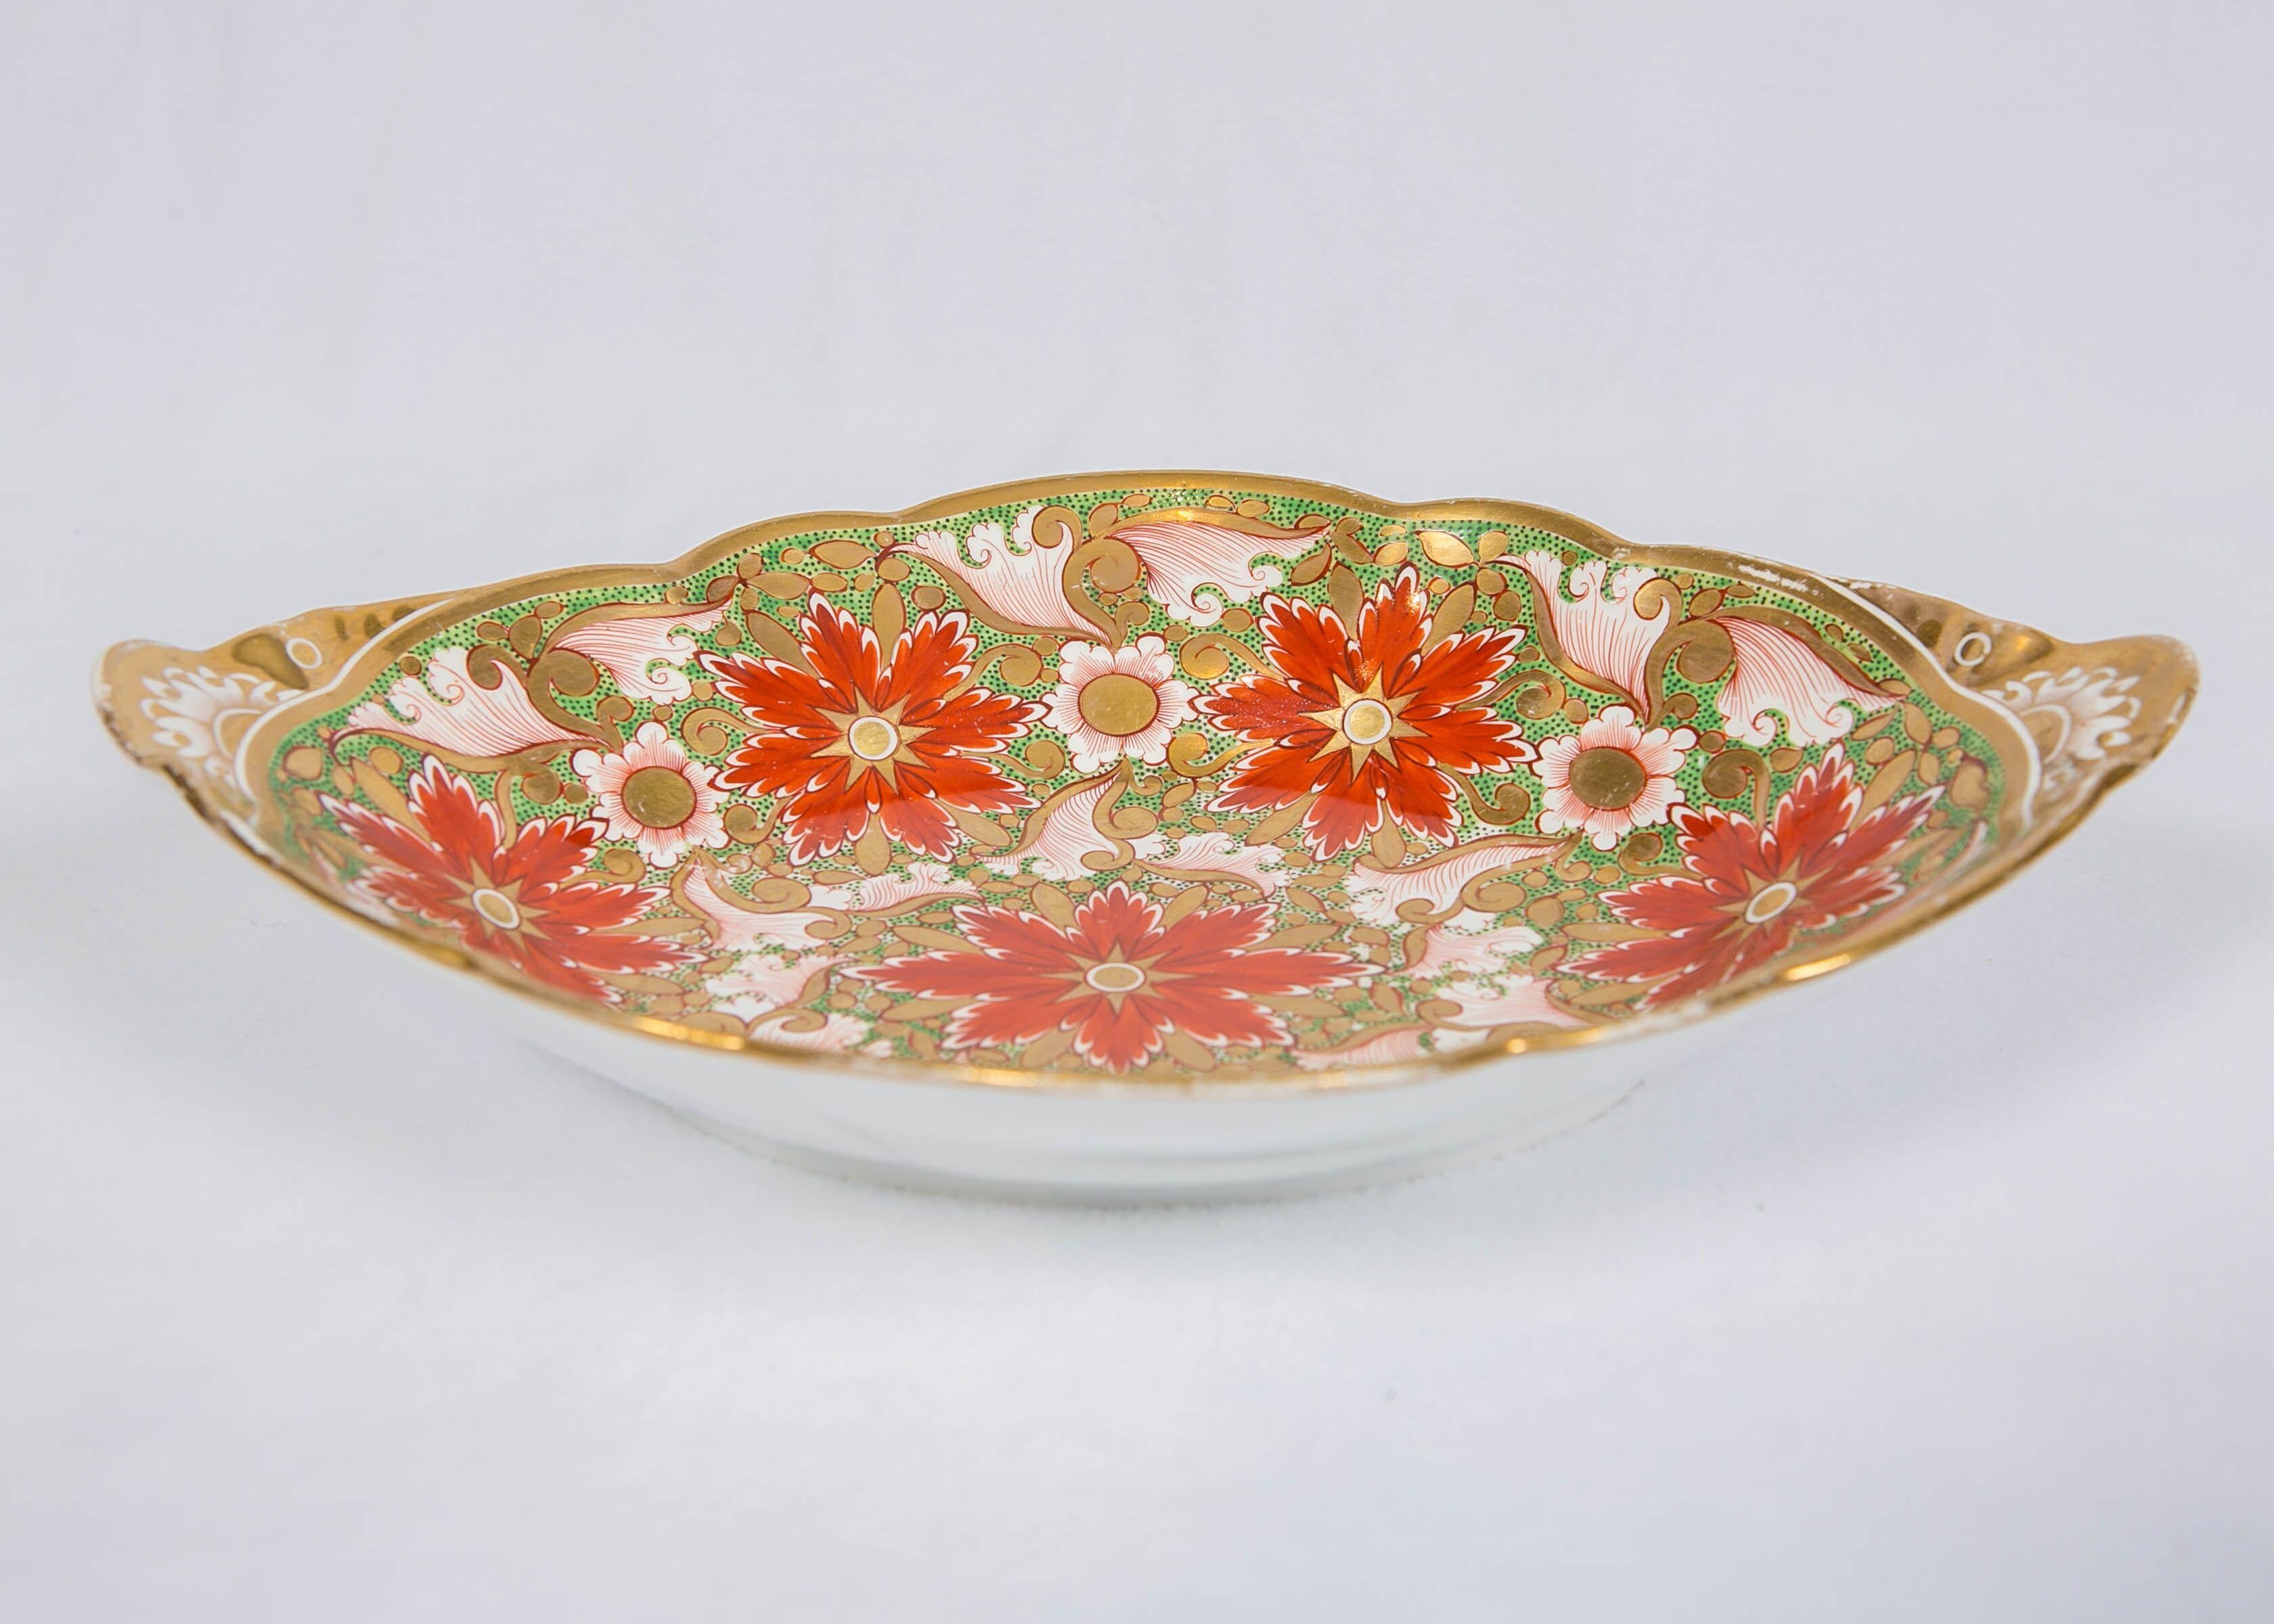 19th Century Christmas Dish Made by Minton in England circa 1805